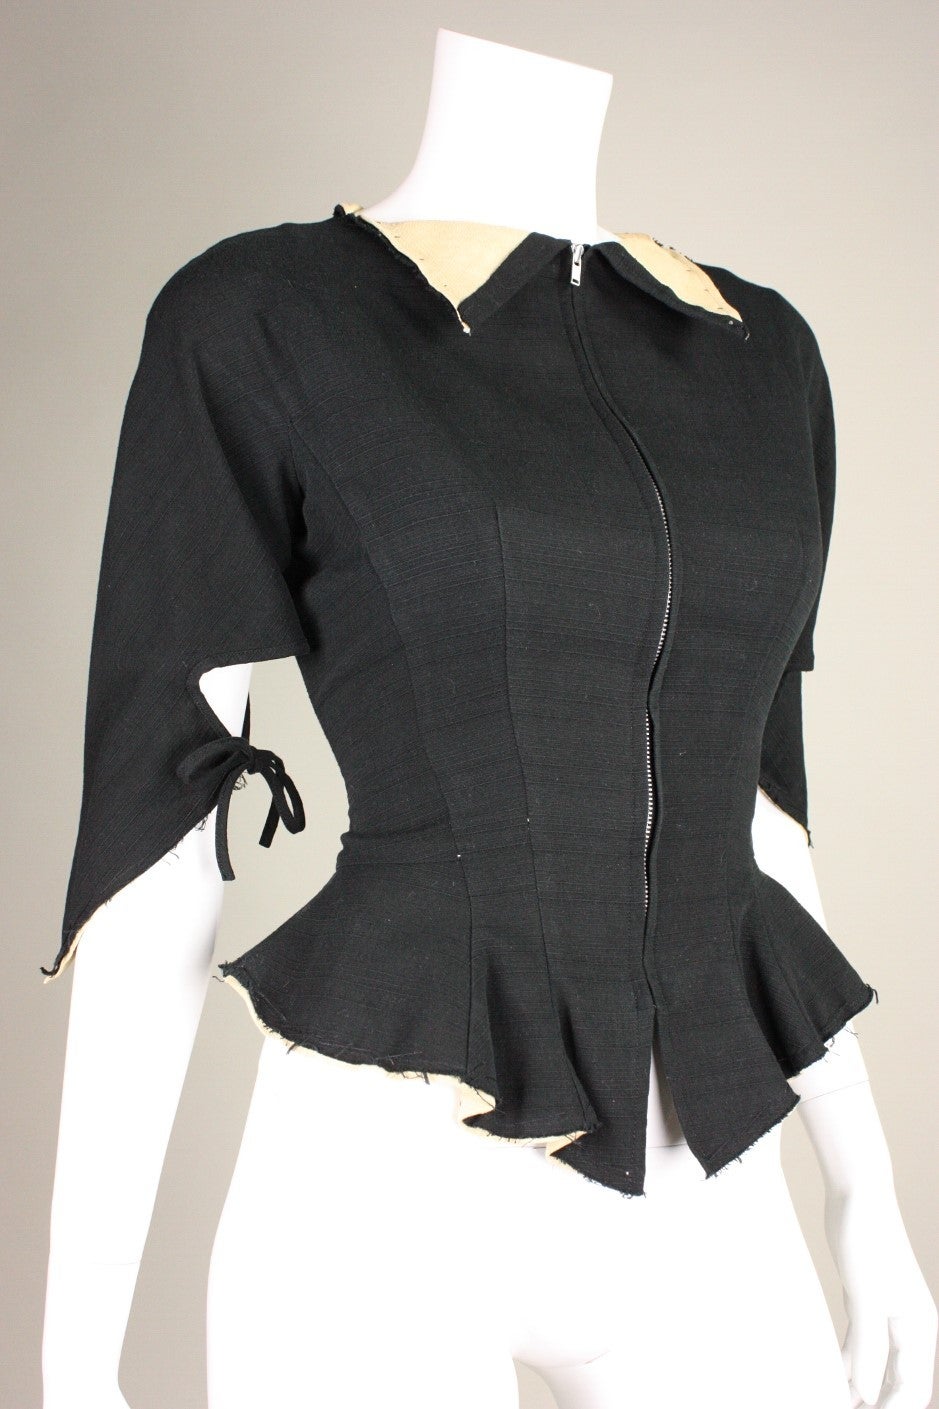 Fitted jacket from Yohji Yamamoto is made of black cotton with contrasting beige collar and cuffs.  3/4-length sleeves with open detail and ties at inner elbows.  Nipped waist with peplum.  Partially lined.  Center front zippered closure.

Labeled